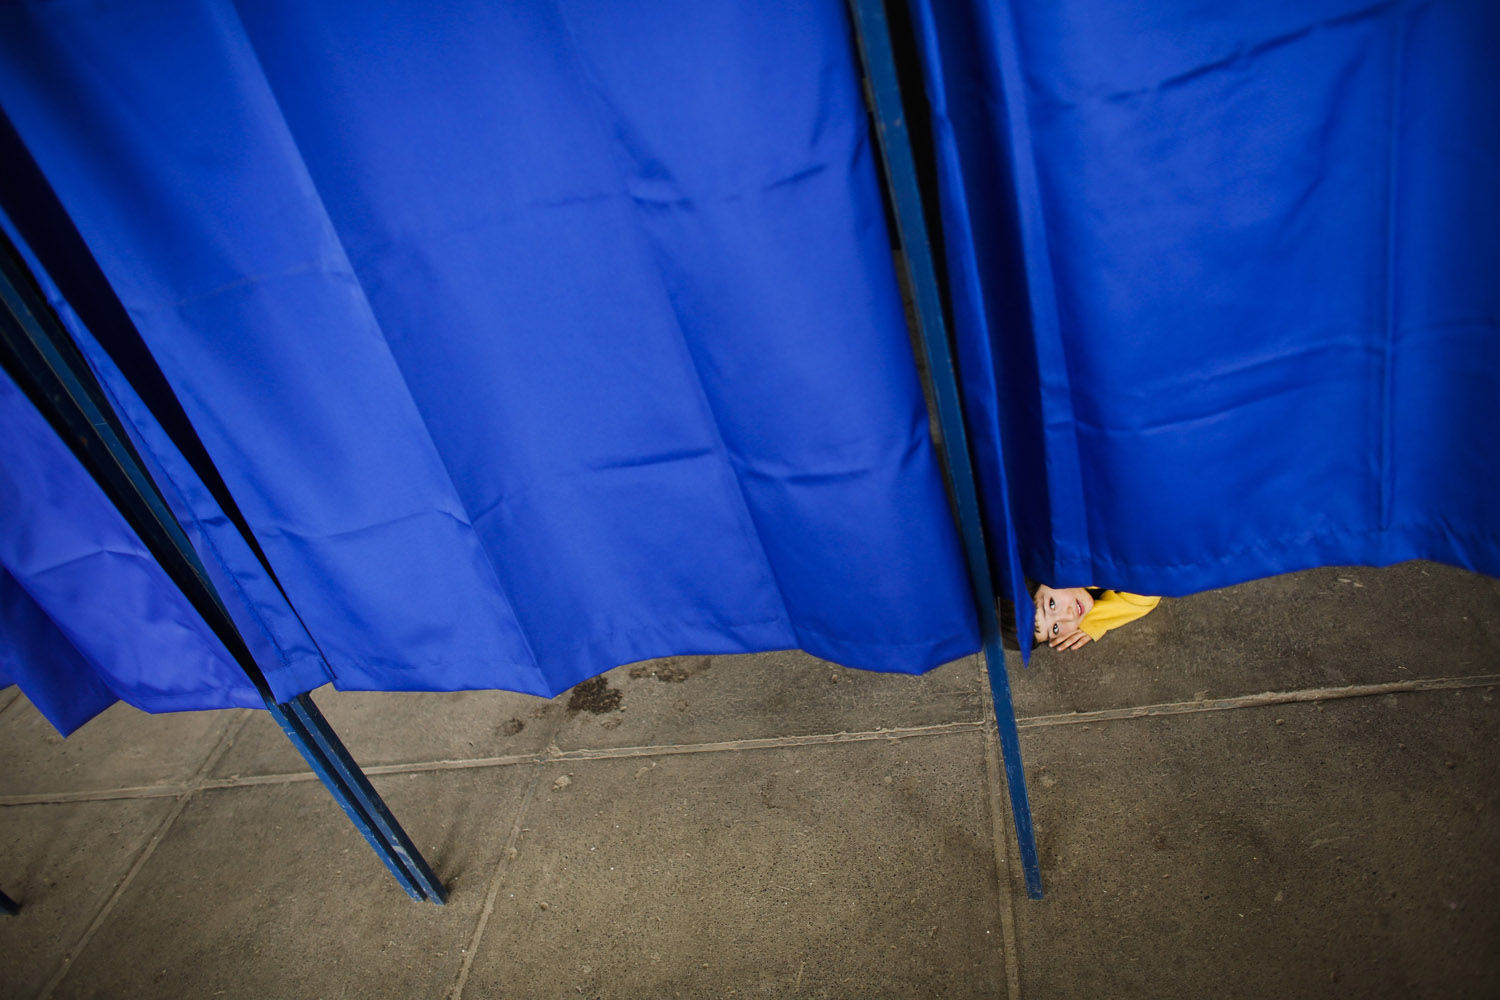 Nov. 17, 2013. A child looks from underneath a voting booth during Chile's general elections at a polling station at the National Stadium in Santiago, Chile.